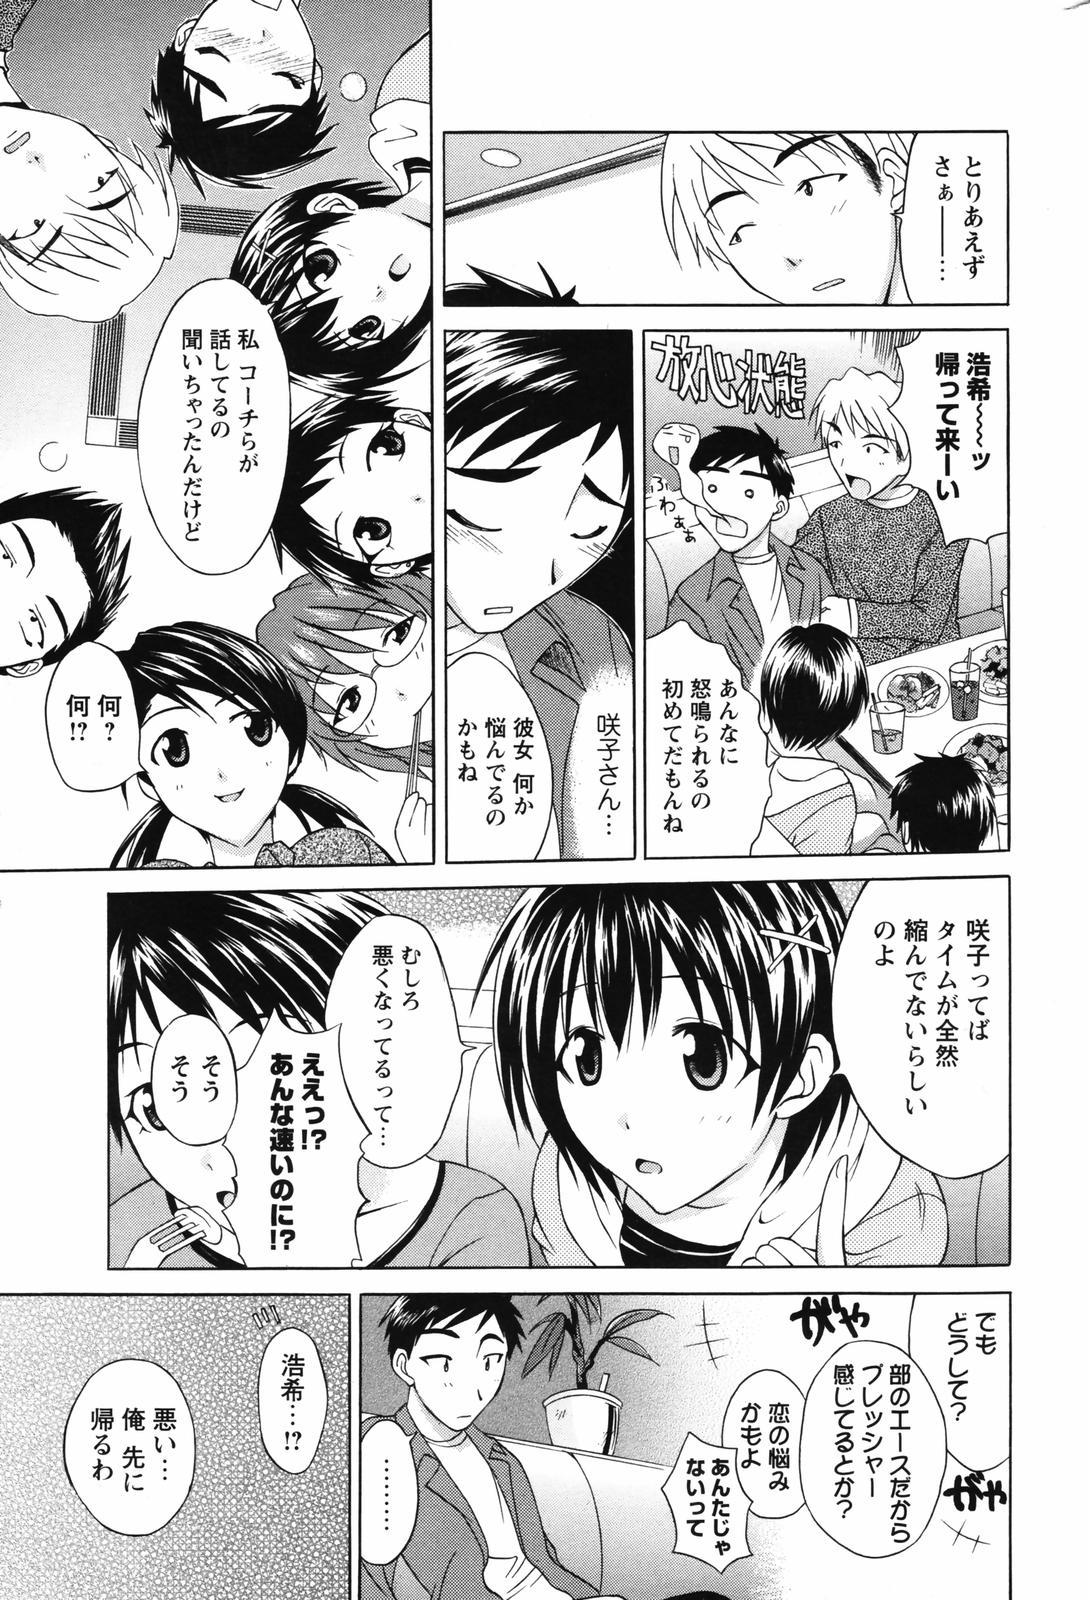 Men's Young Special IKAZUCHI 2007-03 Vol. 01 224